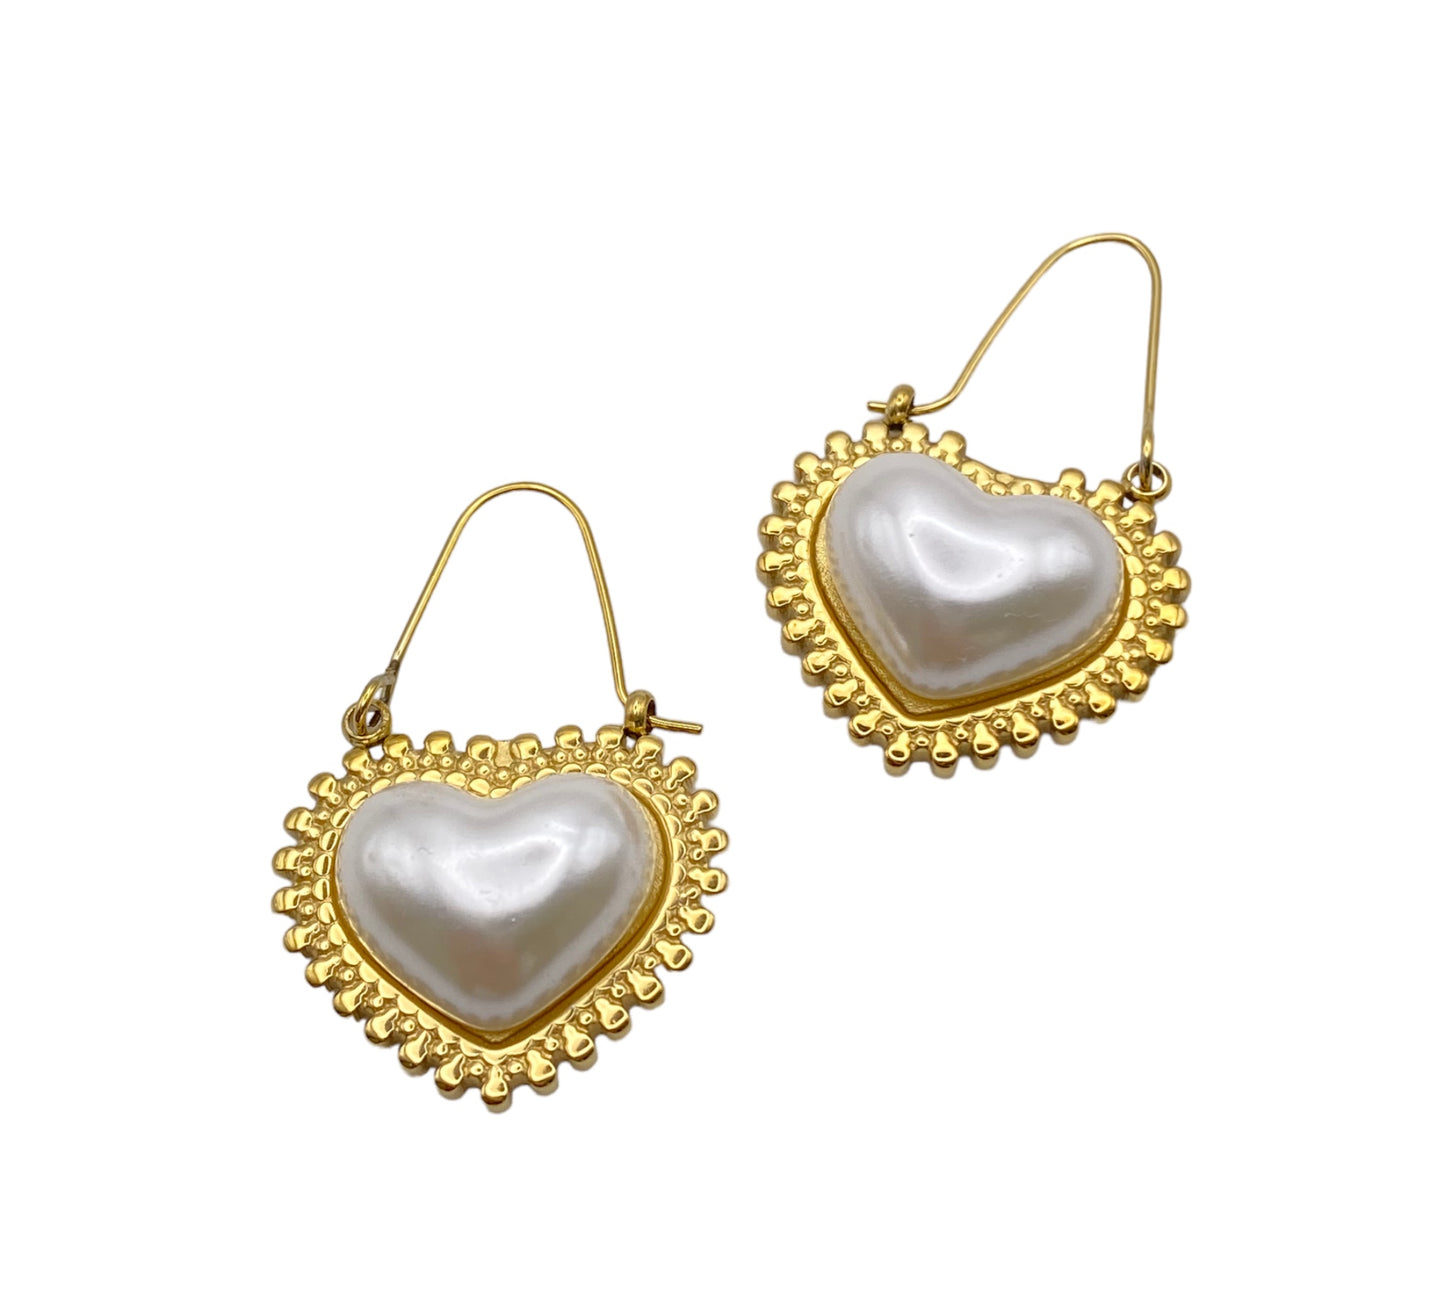 "OLIVIA" gold plated heart shaped earrings with pearl